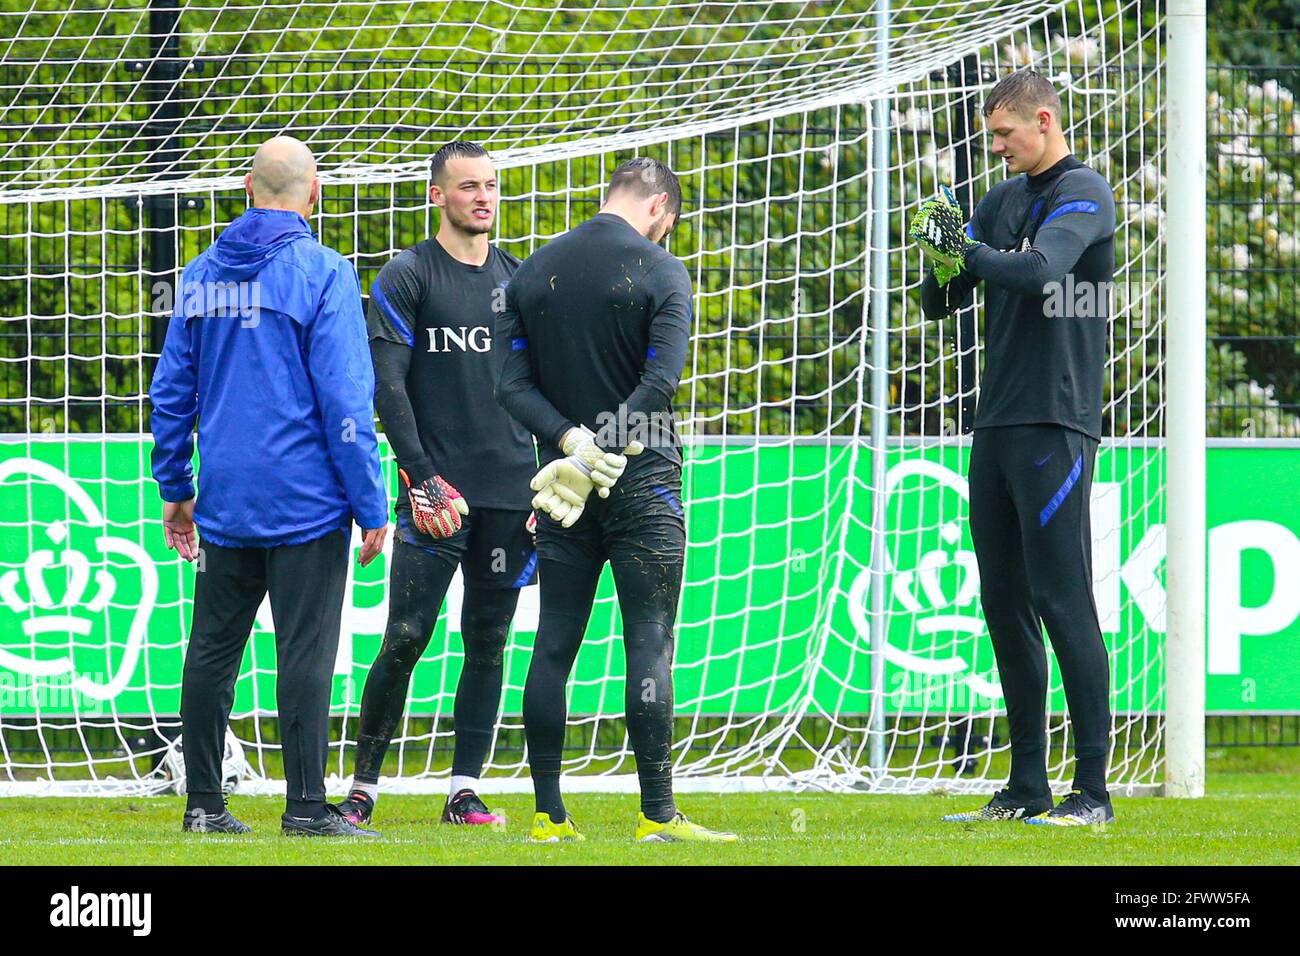 ZEIST, NETHERLANDS - MAY 24: goalkeeper Maarten Paes of Netherlands U21, goalkeeper trainer Sierd van der Berg of Netherlands U21, goalkeeper Justin Bijlow of Netherlands U21, Kjell Scherpen of Netherlands U21 during a Training Session of Netherlands U21 at KNVB Campus on May 24, 2021 in Zeist, Netherlands. (Photo by Perry vd Leuvert/Orange Pictures) Stock Photo